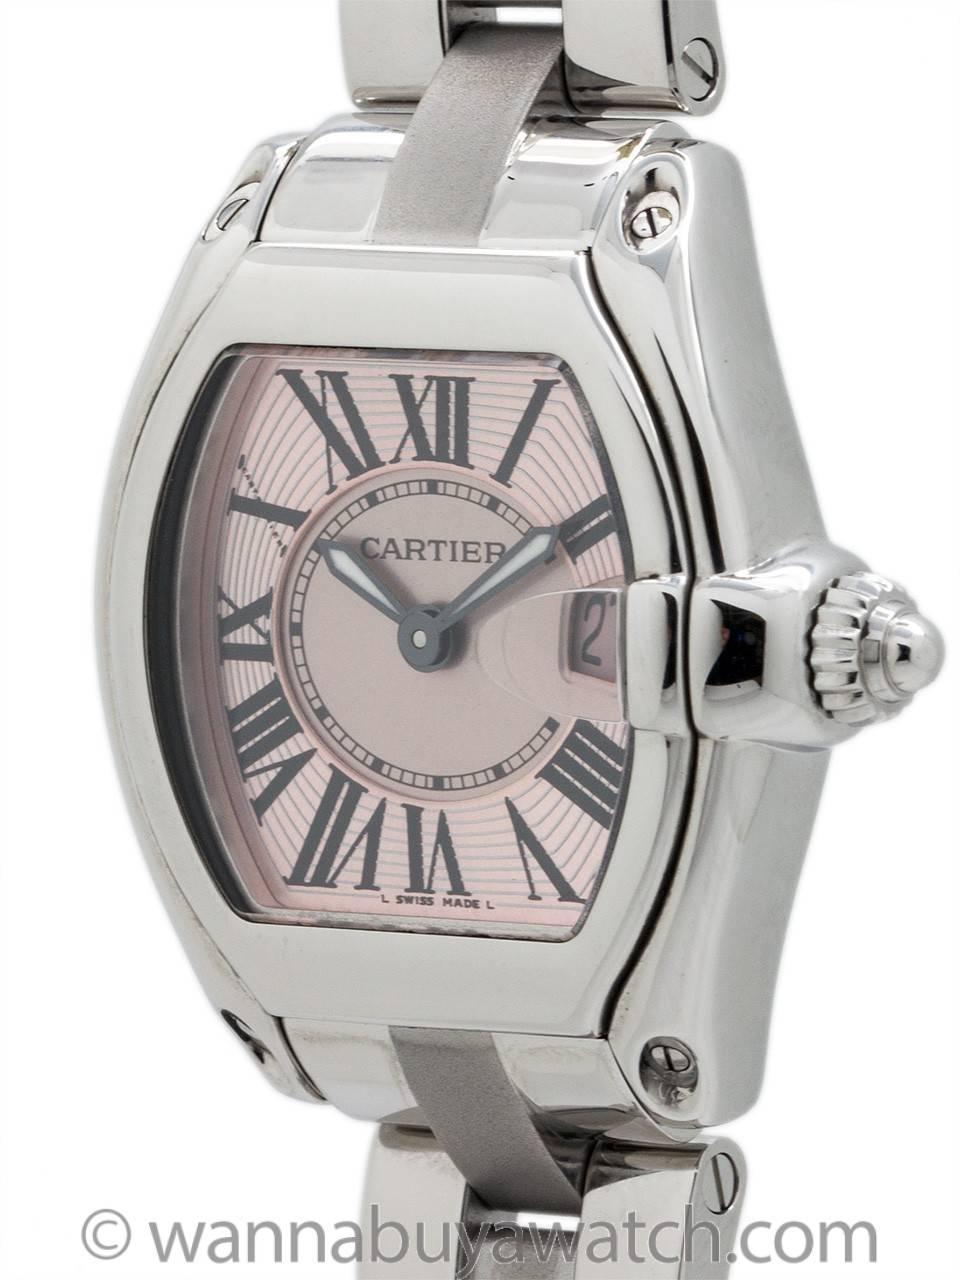 Cartier lady Roadster Breast Cancer limited edition circa 2005. Featuring 29 x 36mm tones shaped case with sapphire crystal and date at 3 o’clock. With classic stretch Roman figures dial, with pink outer and inner pink breast cancer ribbon design.